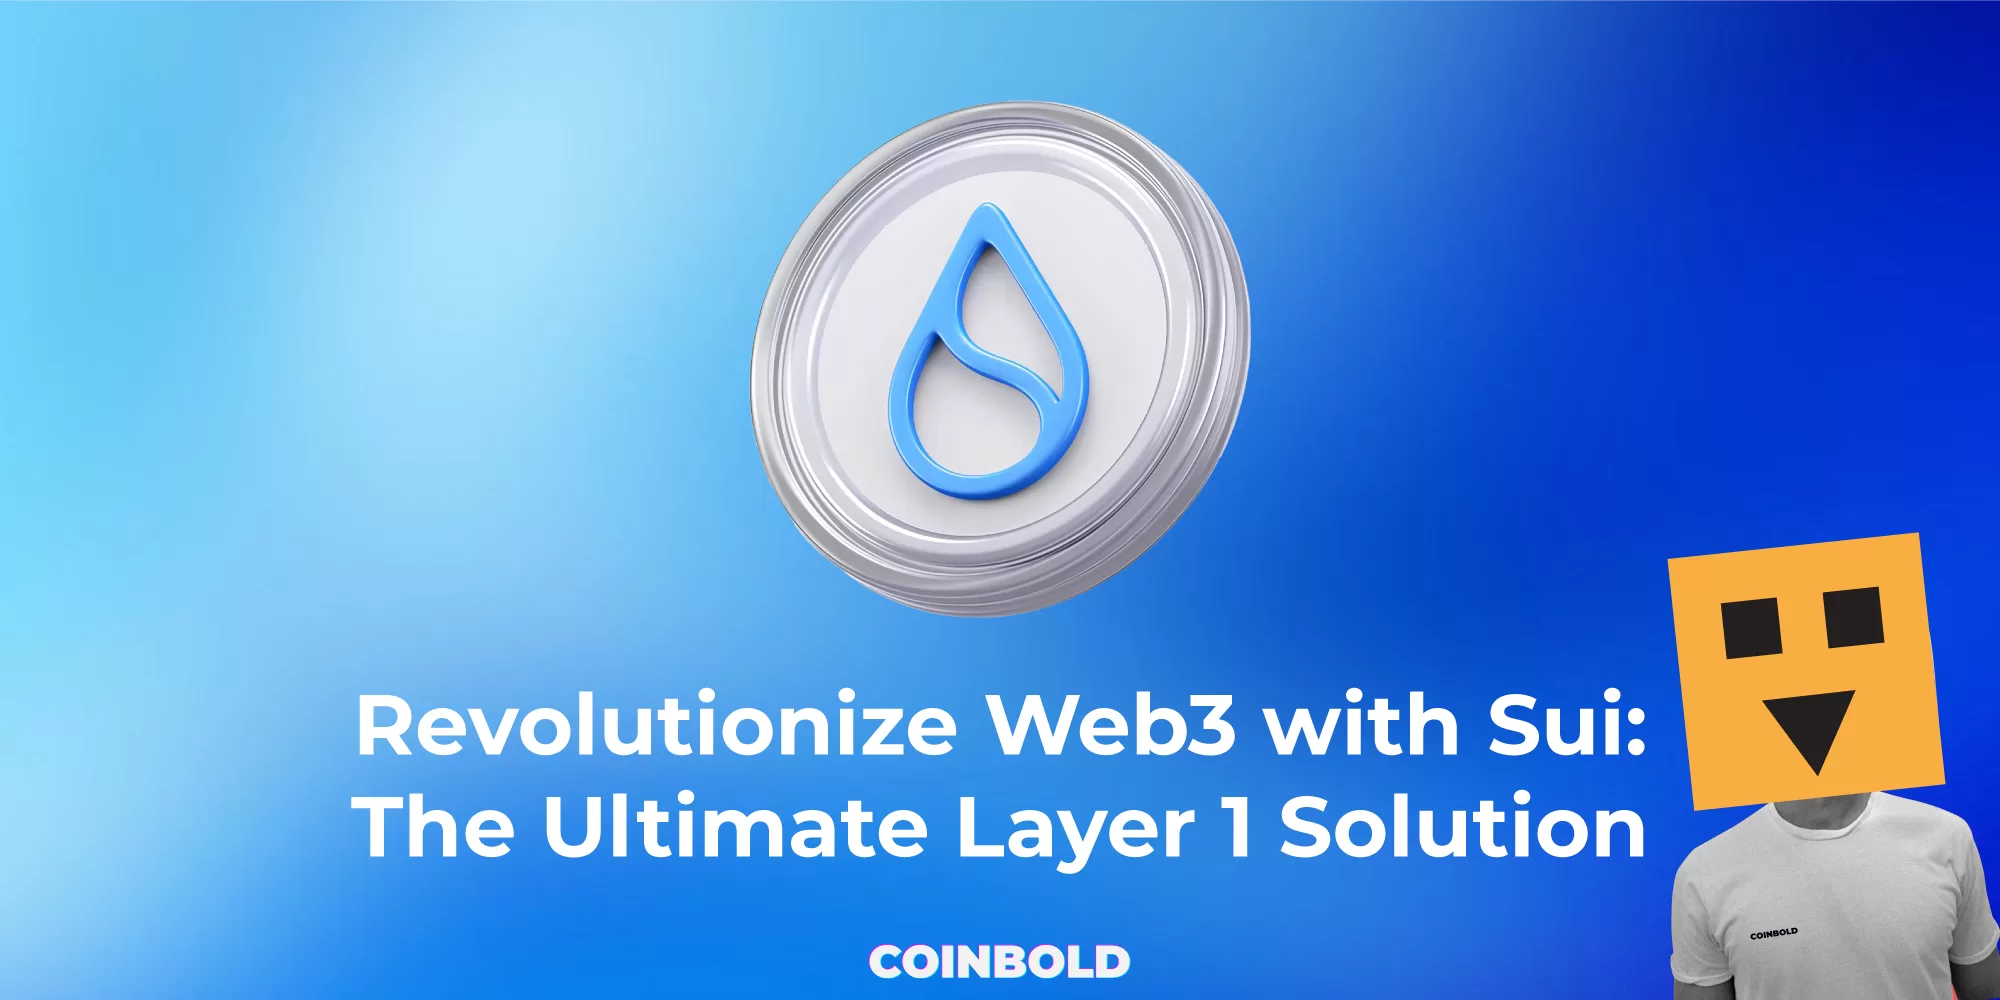 Revolutionize Web3 with Sui The Ultimate Layer 1 Solution